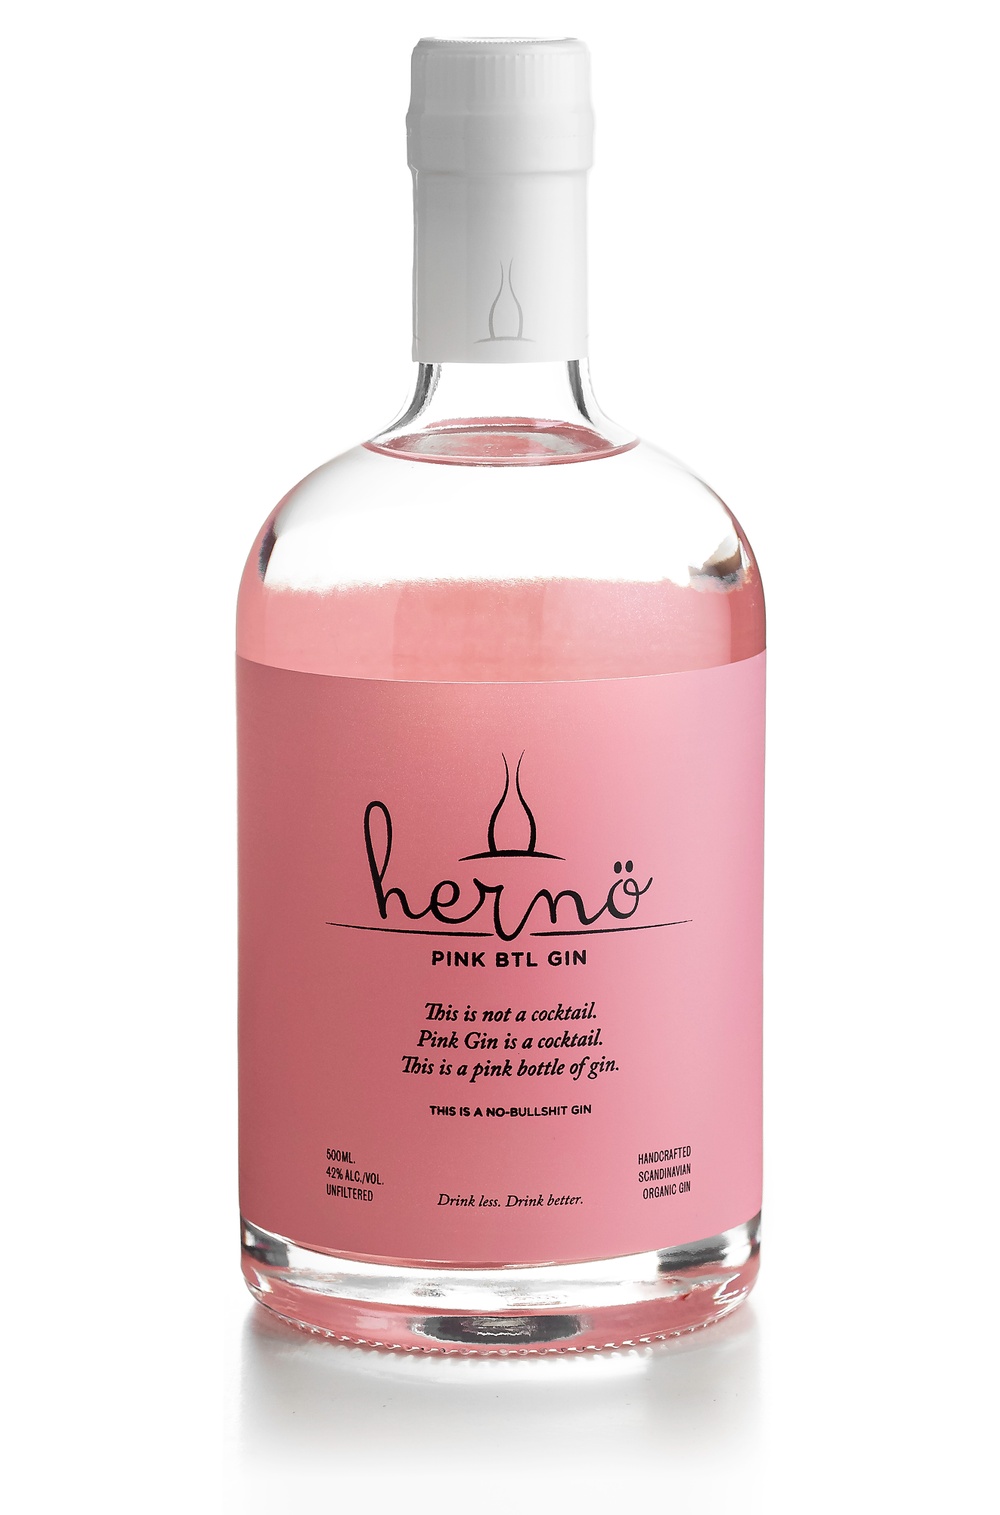 Hernö Pink BTL Gin is an organic London Dry Gin, no additives such as colour, artificial aromas or sugar. Gin shouldn’t be coloured as a marketing gimmick. Hernö Pink BTL Gin is a fruity and floral gin yet juniper predominant. Distilled with a total of eight organic botanicals including juniper, strawberries and rose petals. Bottled at 42%.